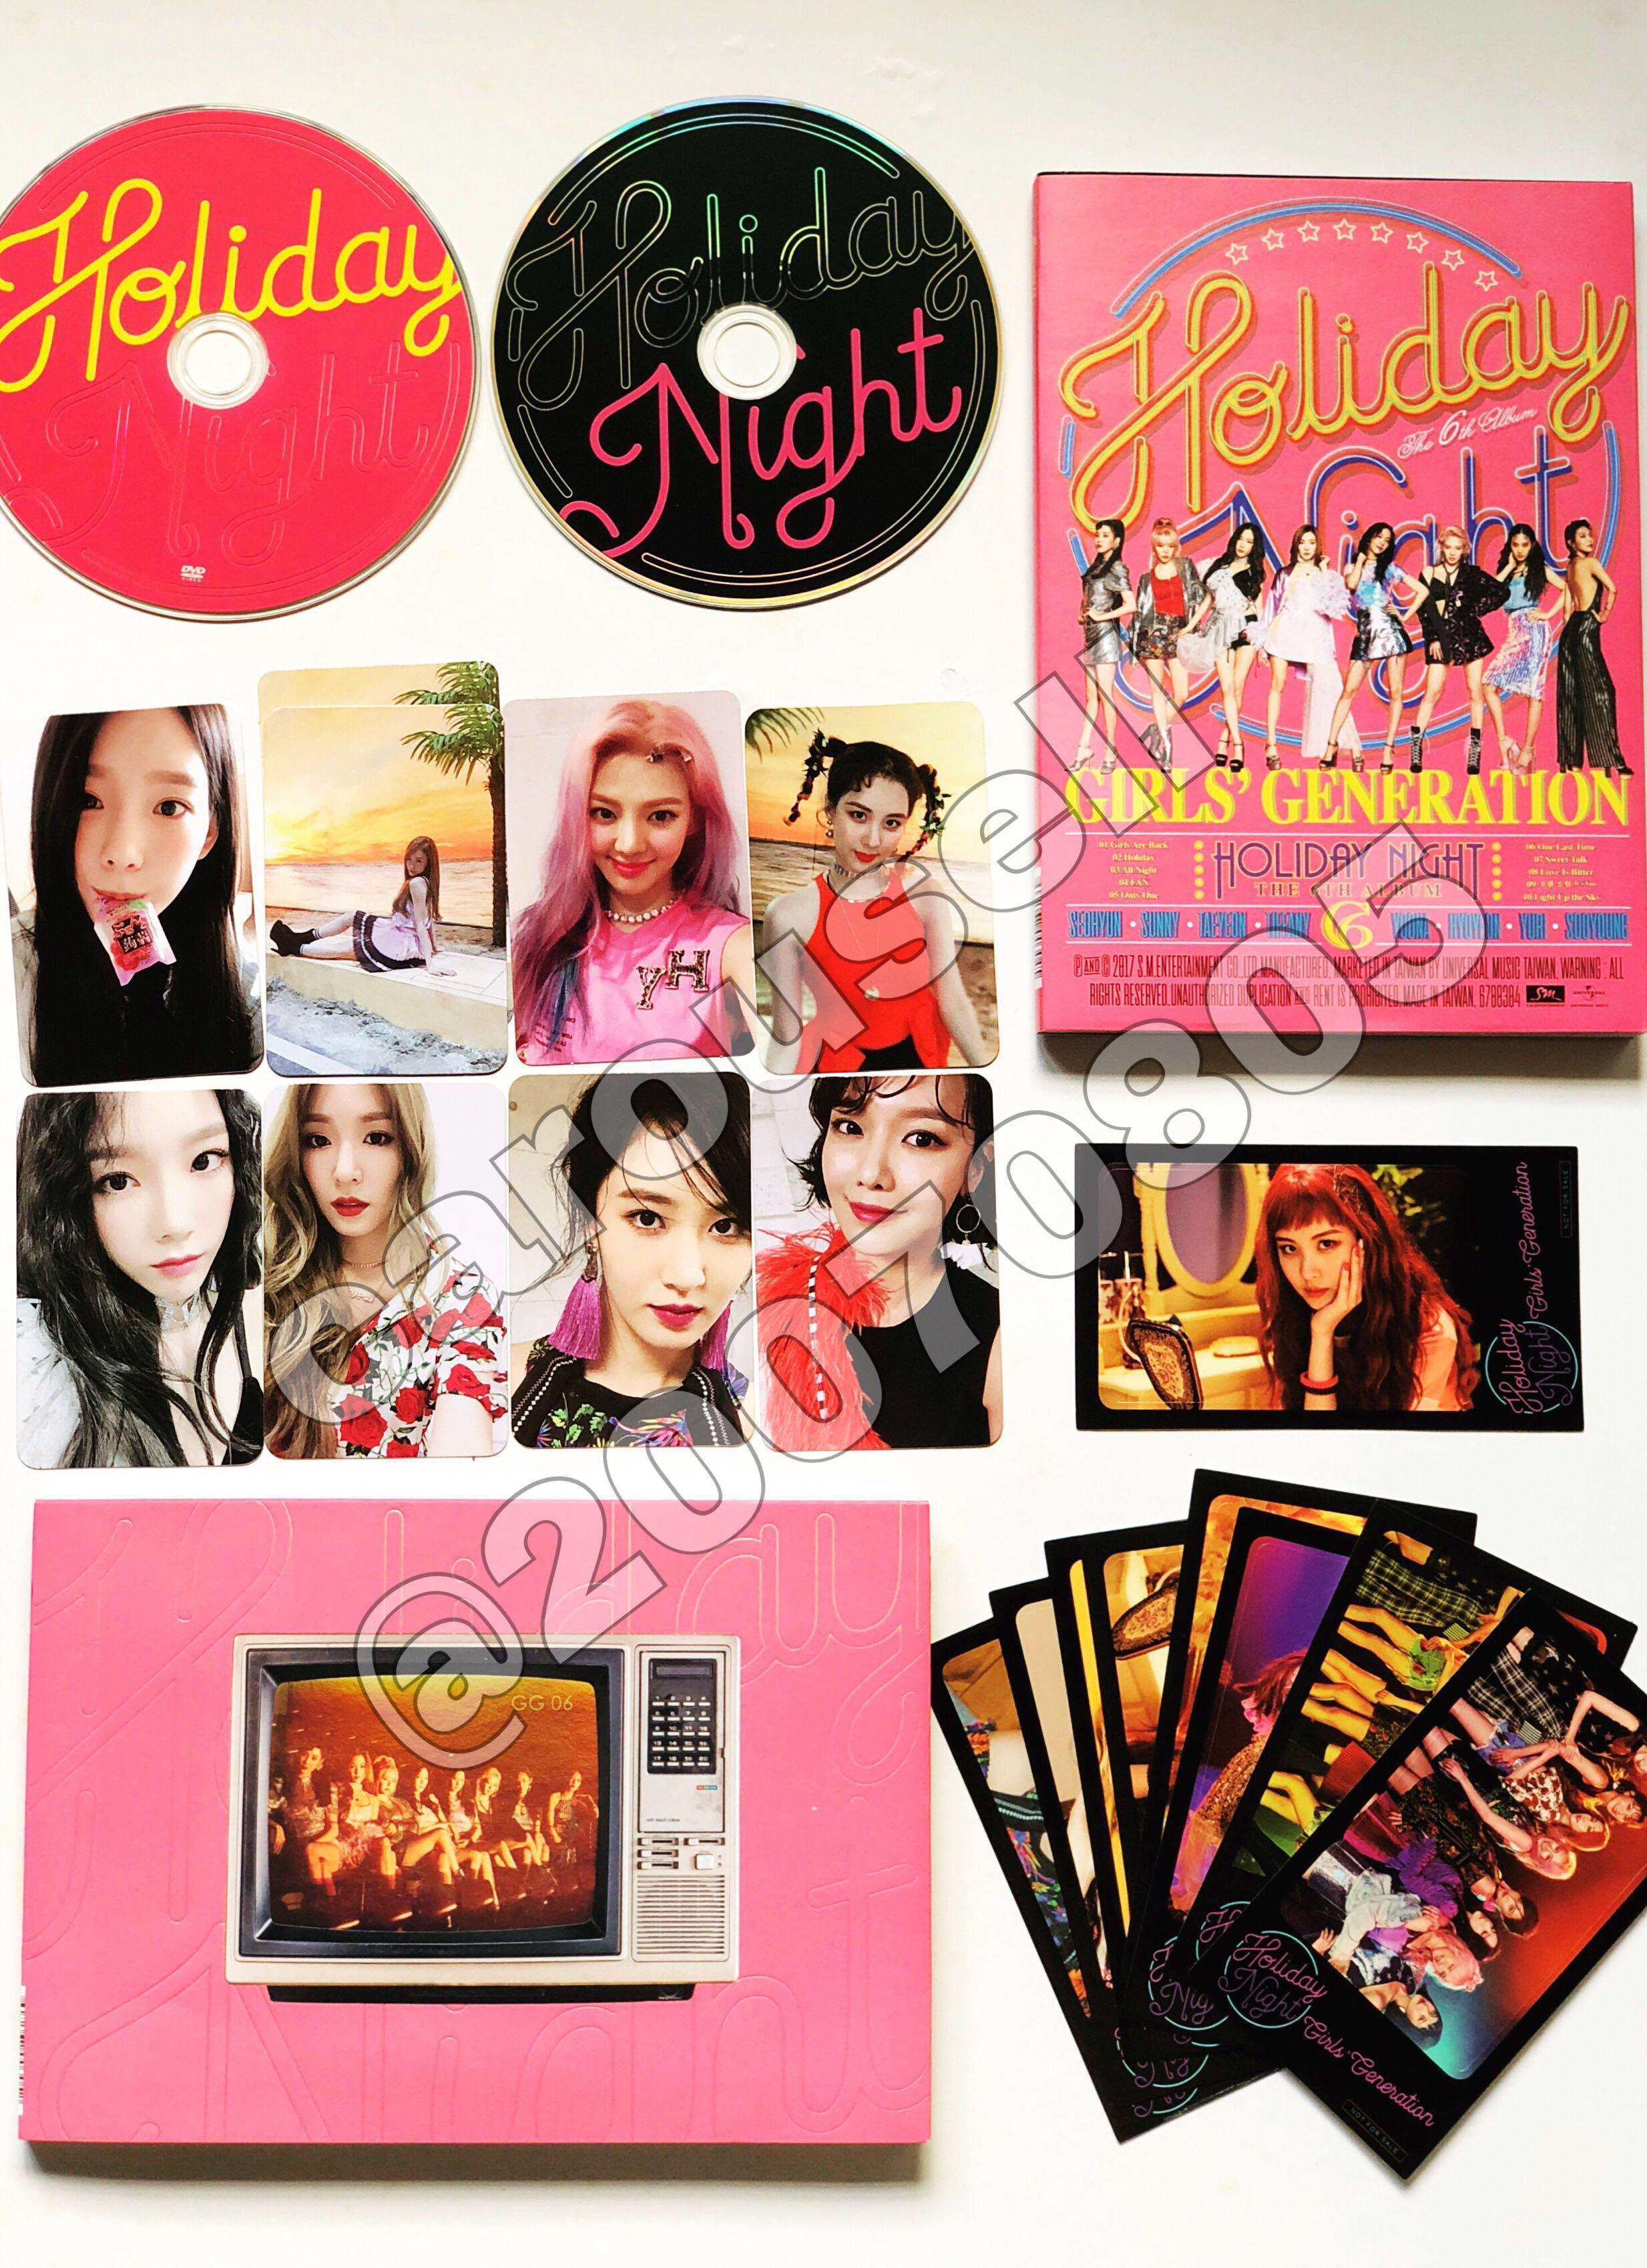 Clearance Snsd Girls Generation Holiday Night Taiwan Album Cd Dvd Hobbies Toys Collectibles Memorabilia K Wave On Carousell